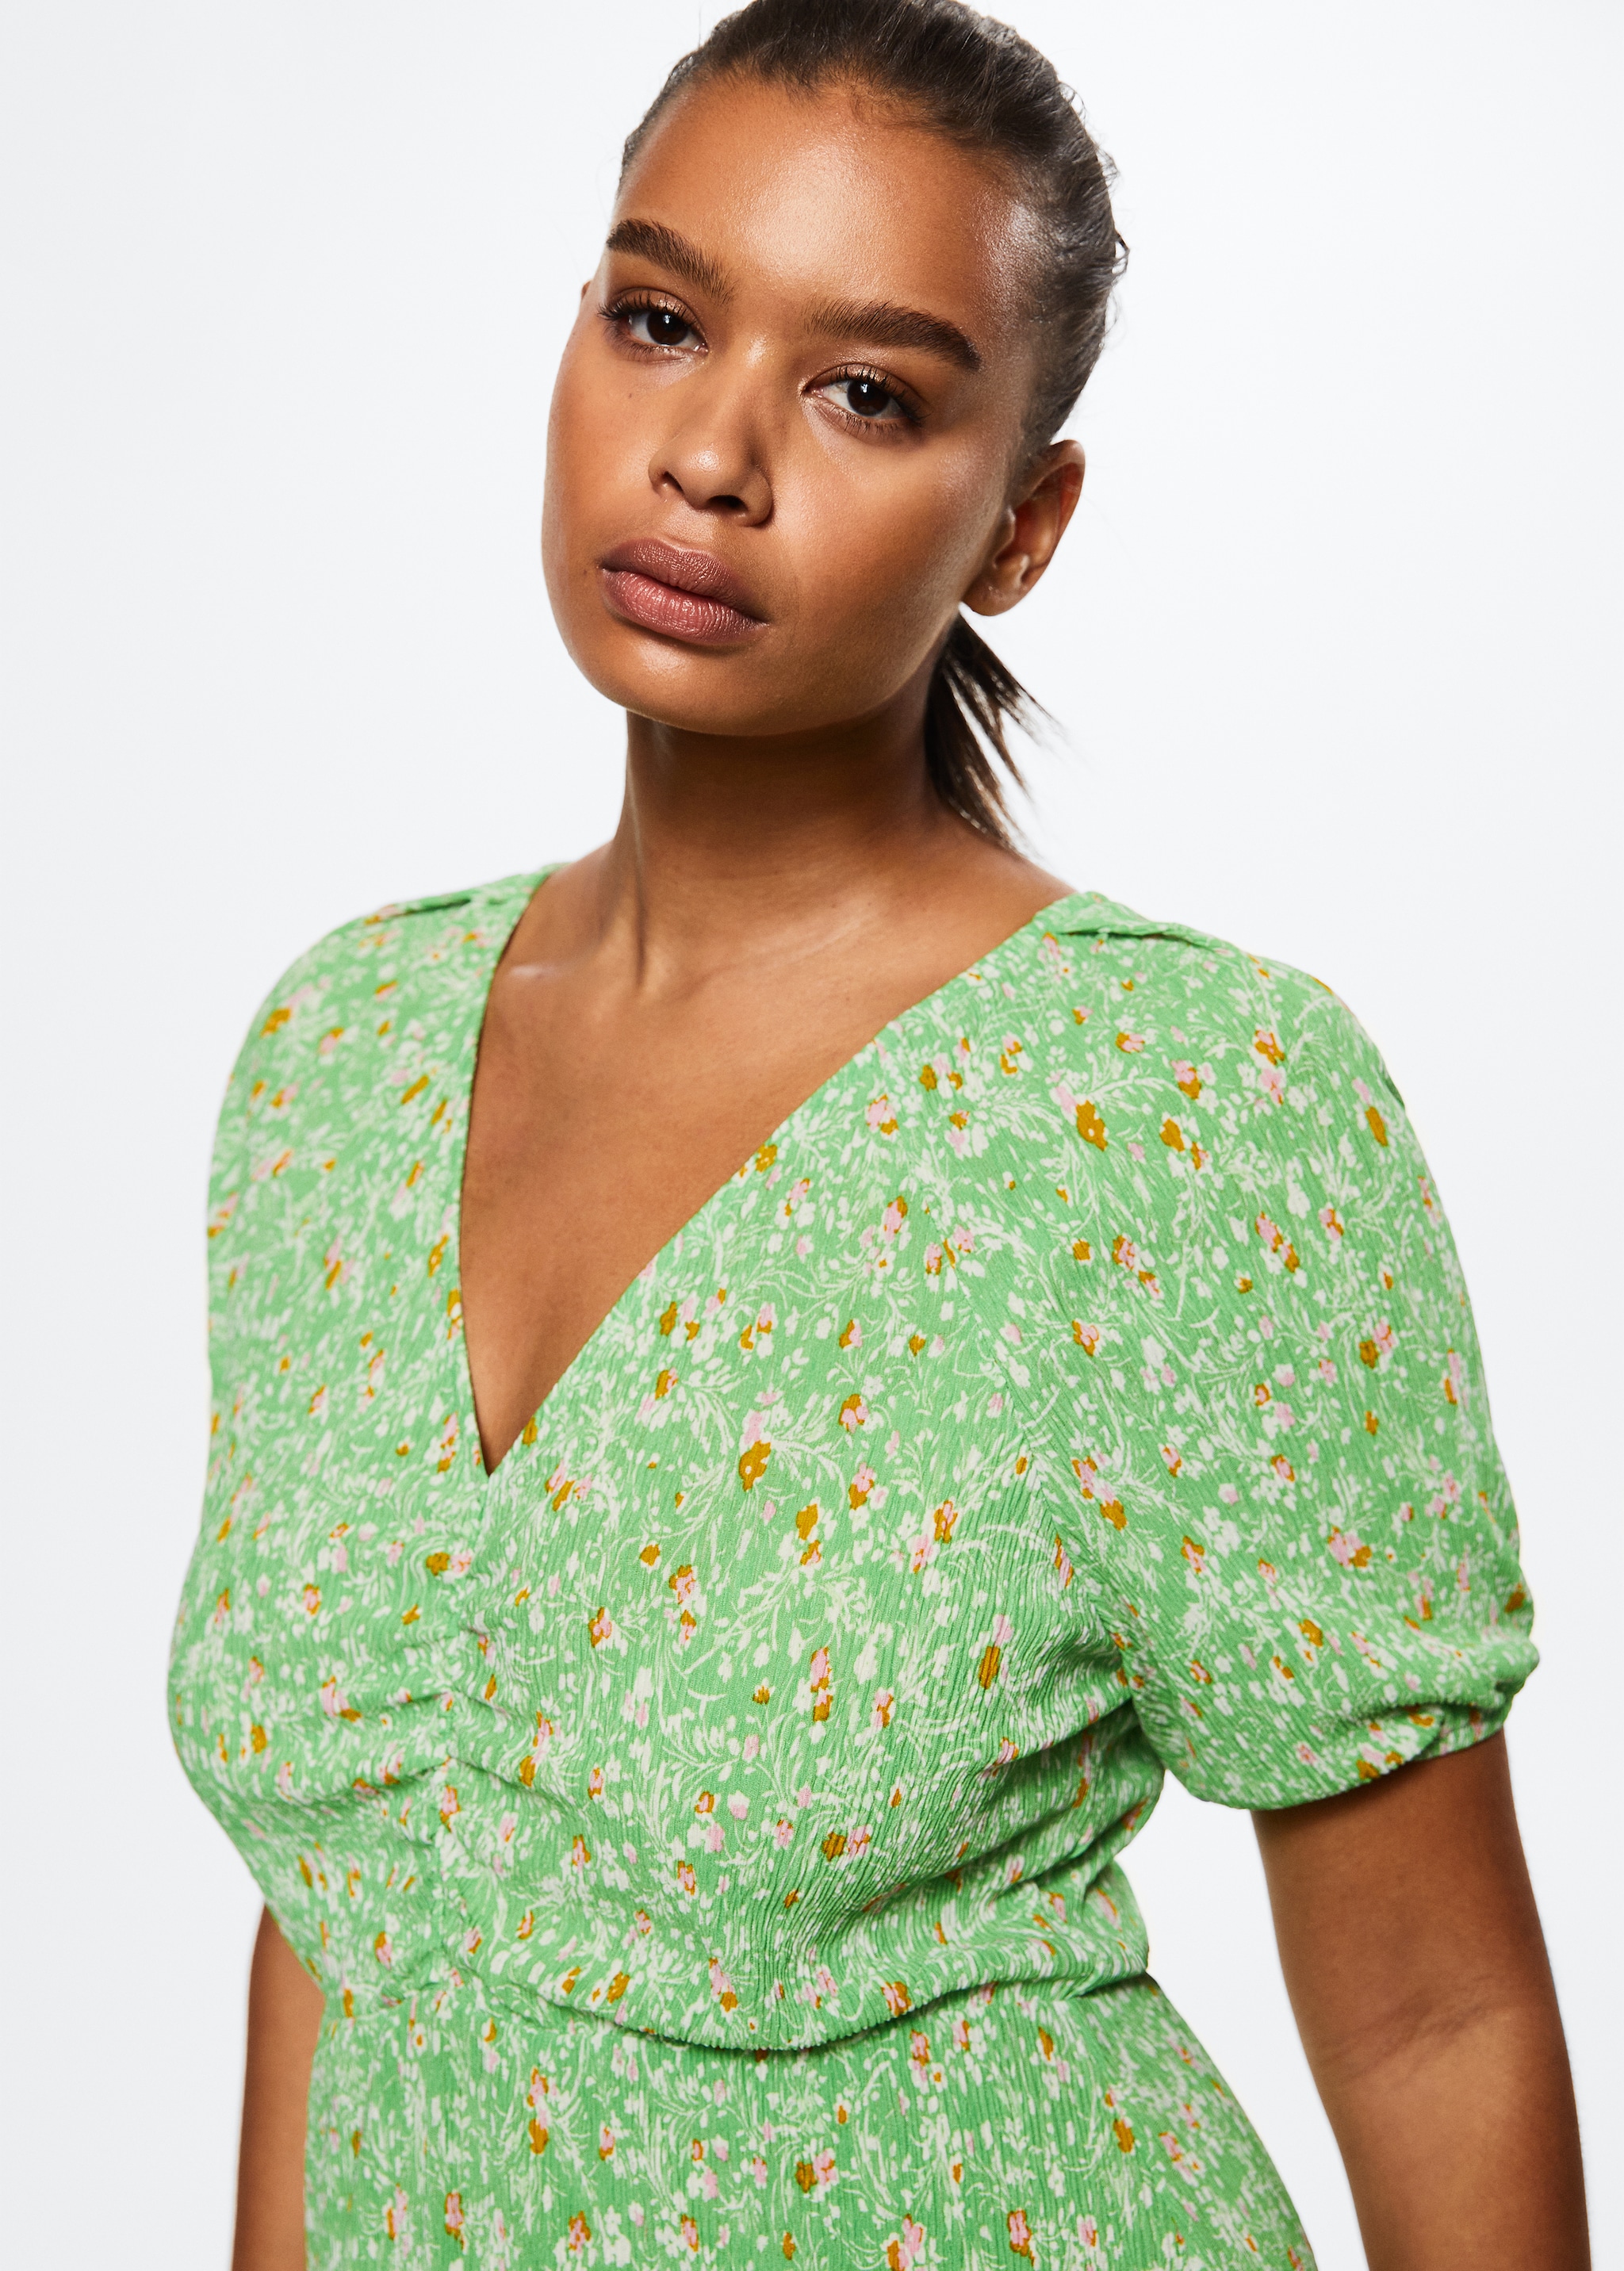 Floral print dress - Details of the article 4